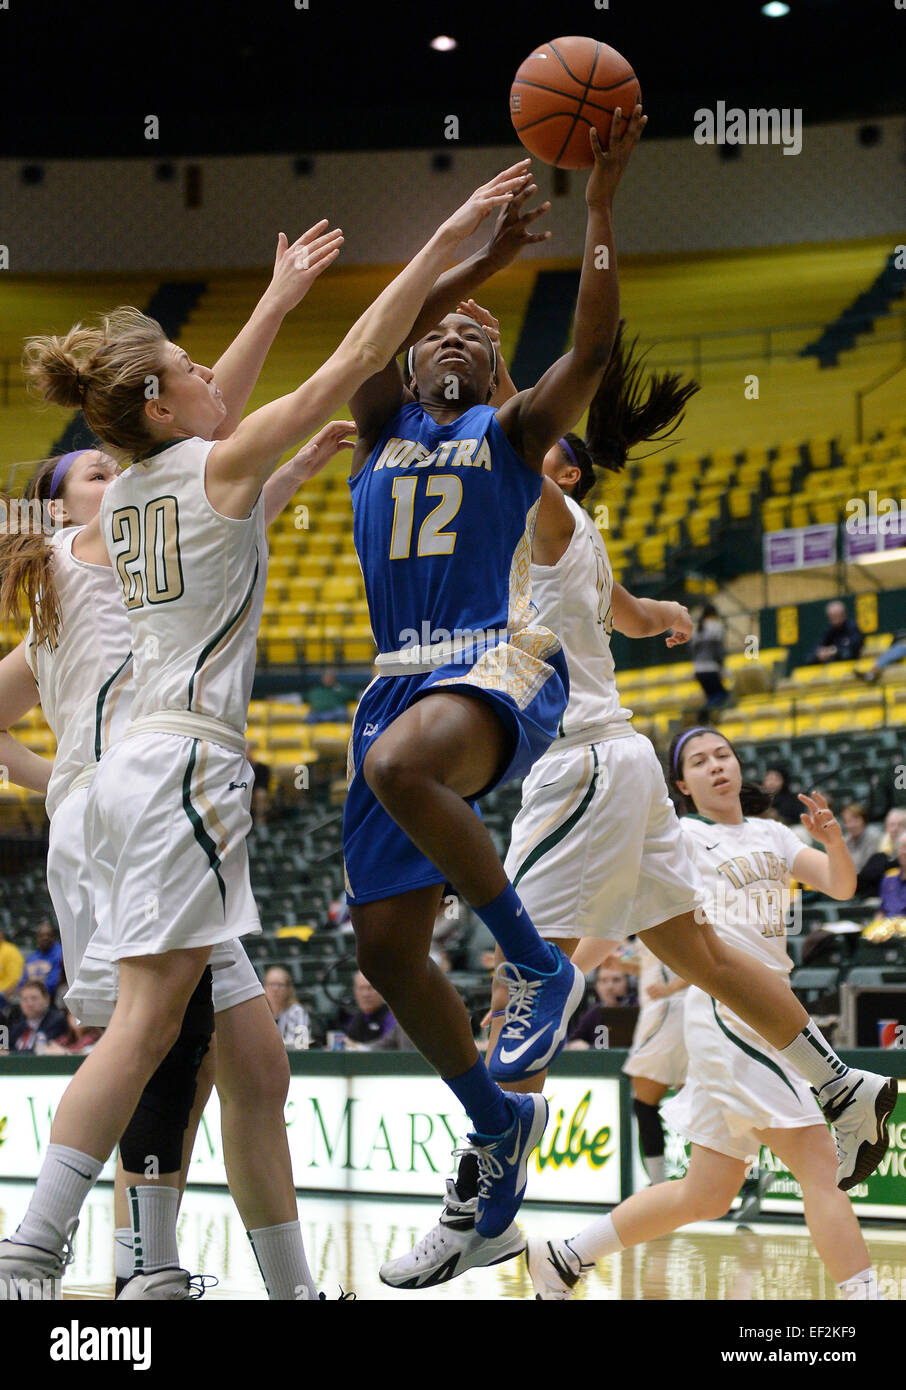 Williamsburg, VA, USA. 25th Jan, 2015. 20150125 - Hofstra guard Darius Faulk (12) drives to the hoop for a score, and also draws a foul on William and Mary guard Kyla Kerstetter (20), in the first half of an NCAA women's basketball game at Kaplan Arena in Williamsburg, Va. William and Mary defeated Hofstra, 57-56. © Chuck Myers/ZUMA Wire/Alamy Live News Stock Photo